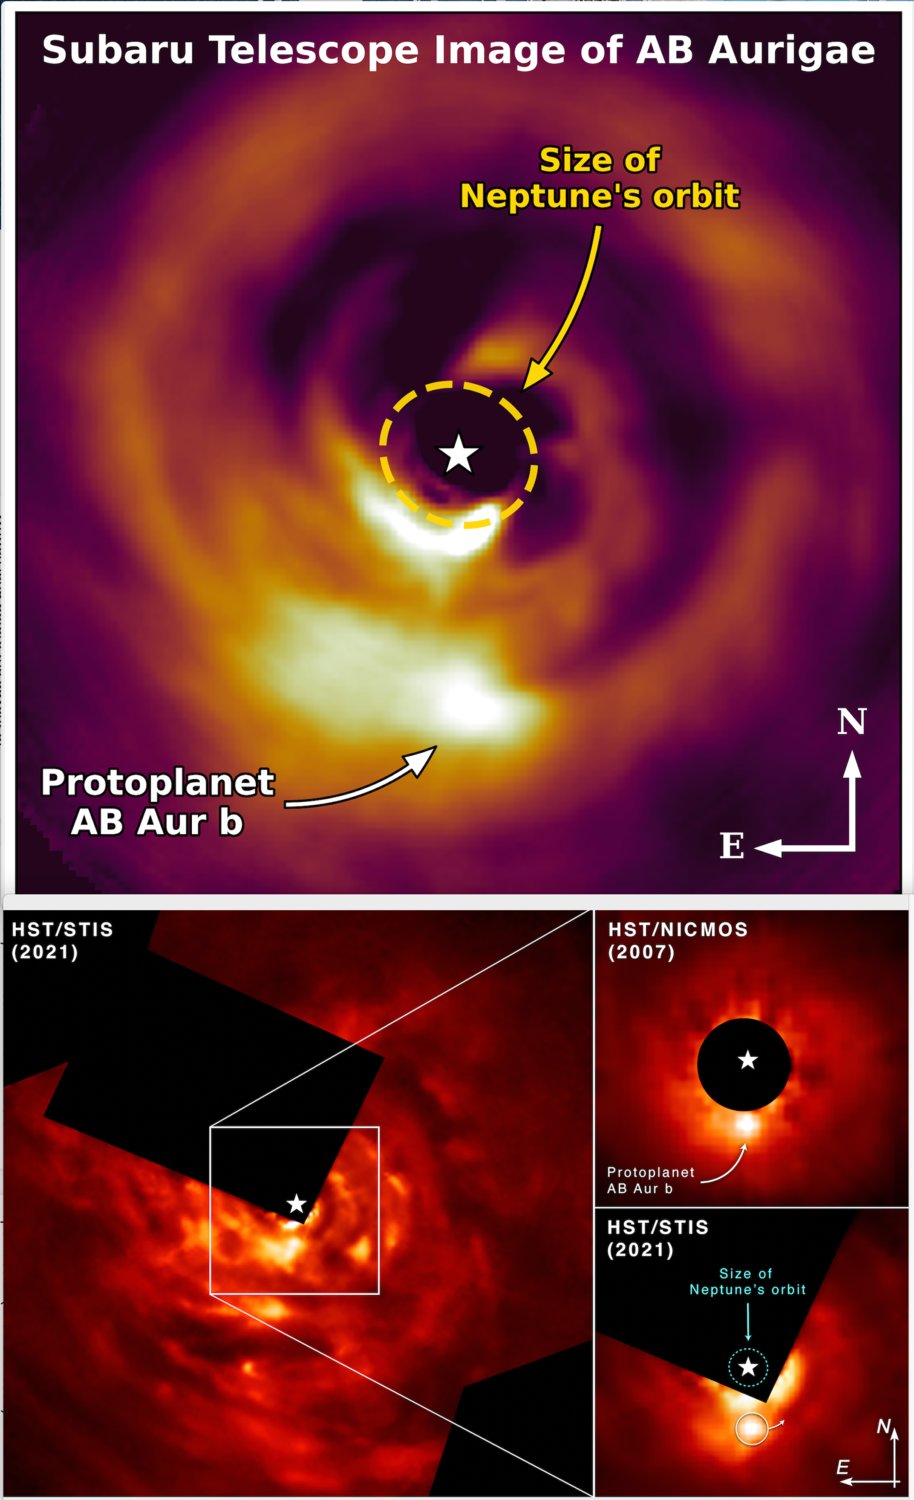 Top: An image from the Hubble Space Telescope demonstrates a comparison of the protoplanet from an image taken in 2007 to an image taken in 2021. Bottom: An image from the Subaru Telescope in Hawaii shows the massive size of the protoplanet forming around AB Aurigae, a very young star in the Auriga constellation about 531 light years from the Sun.